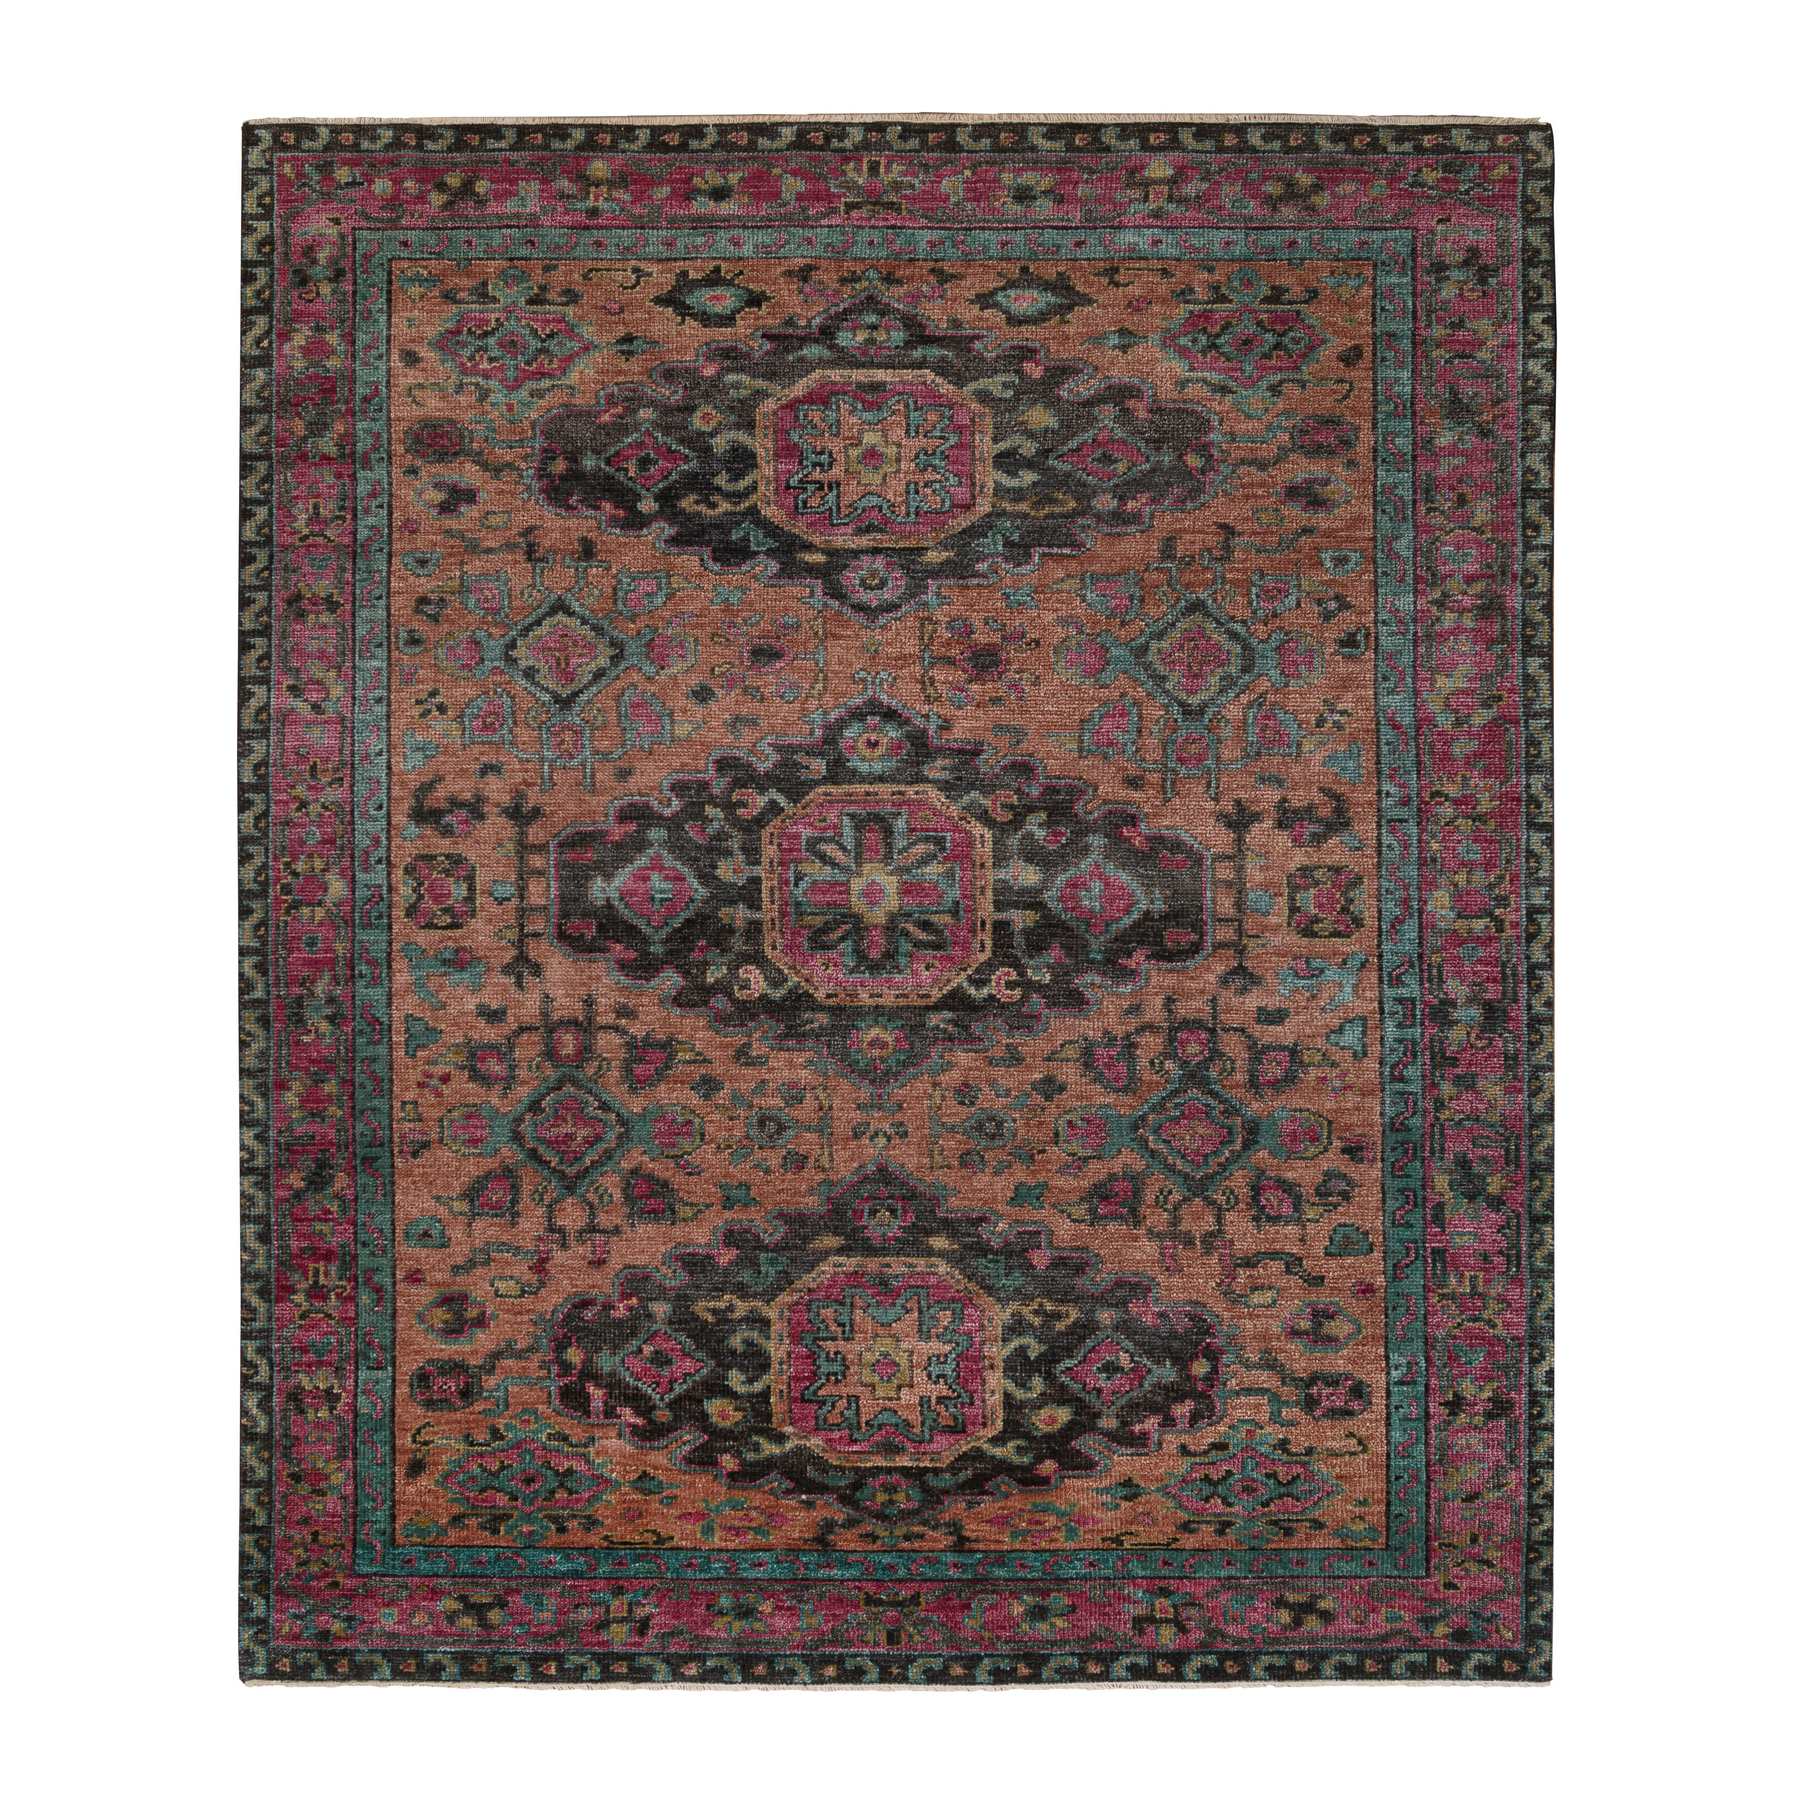 8'2"x10' Honey Brown with Purple Border, Anatolian Design Supple Collection Thick and Plush, Hand Woven Pure Wool, Oriental Rug 